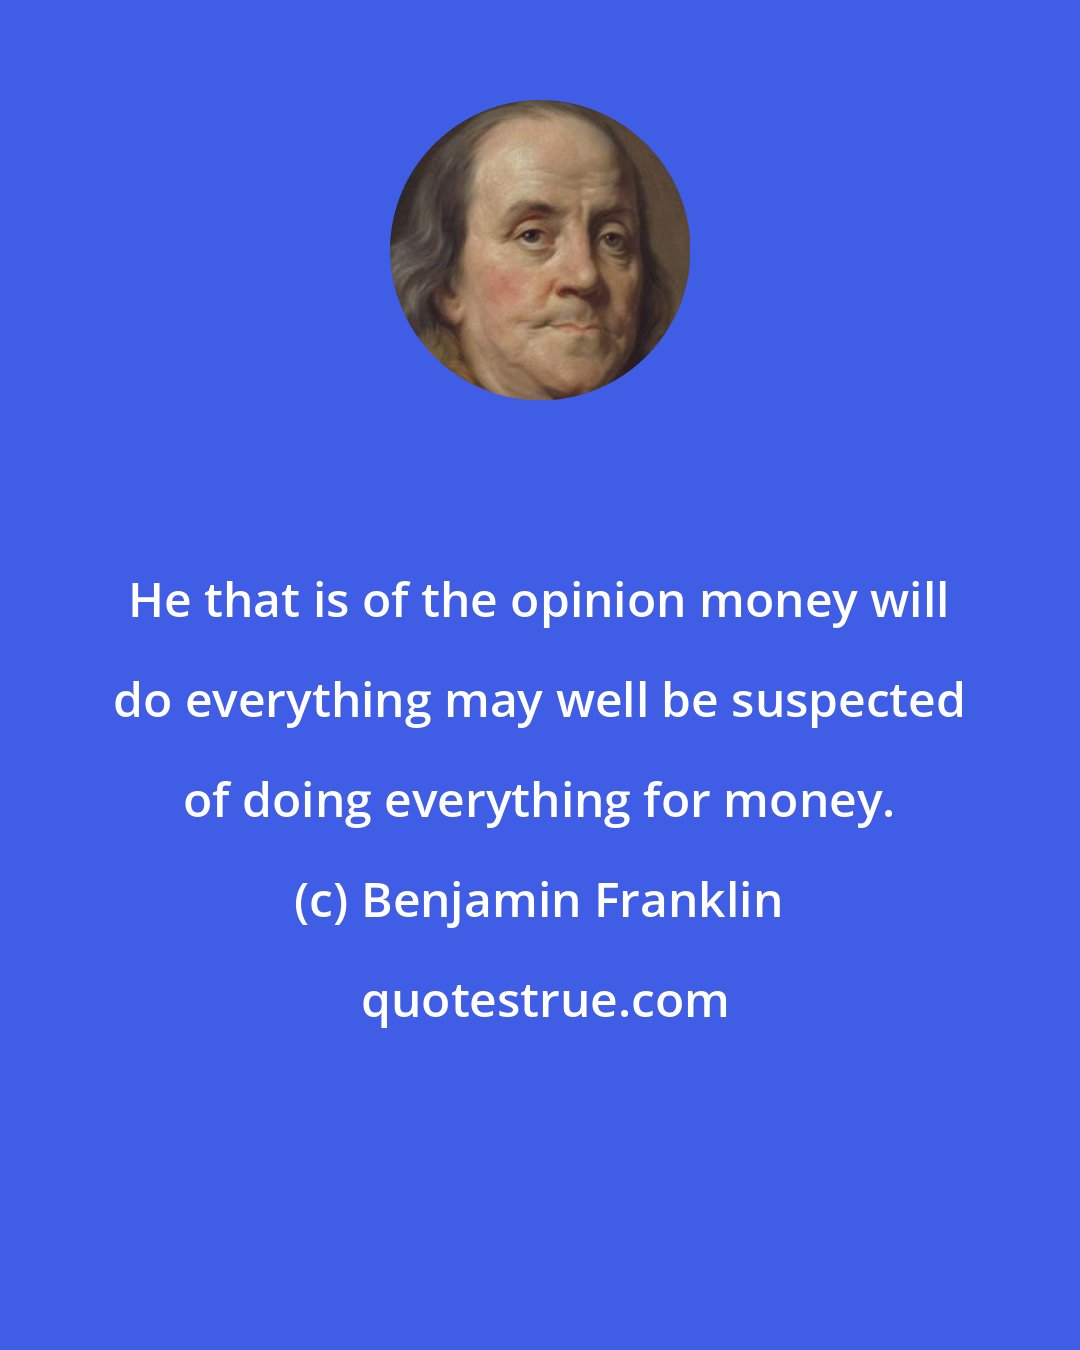 Benjamin Franklin: He that is of the opinion money will do everything may well be suspected of doing everything for money.